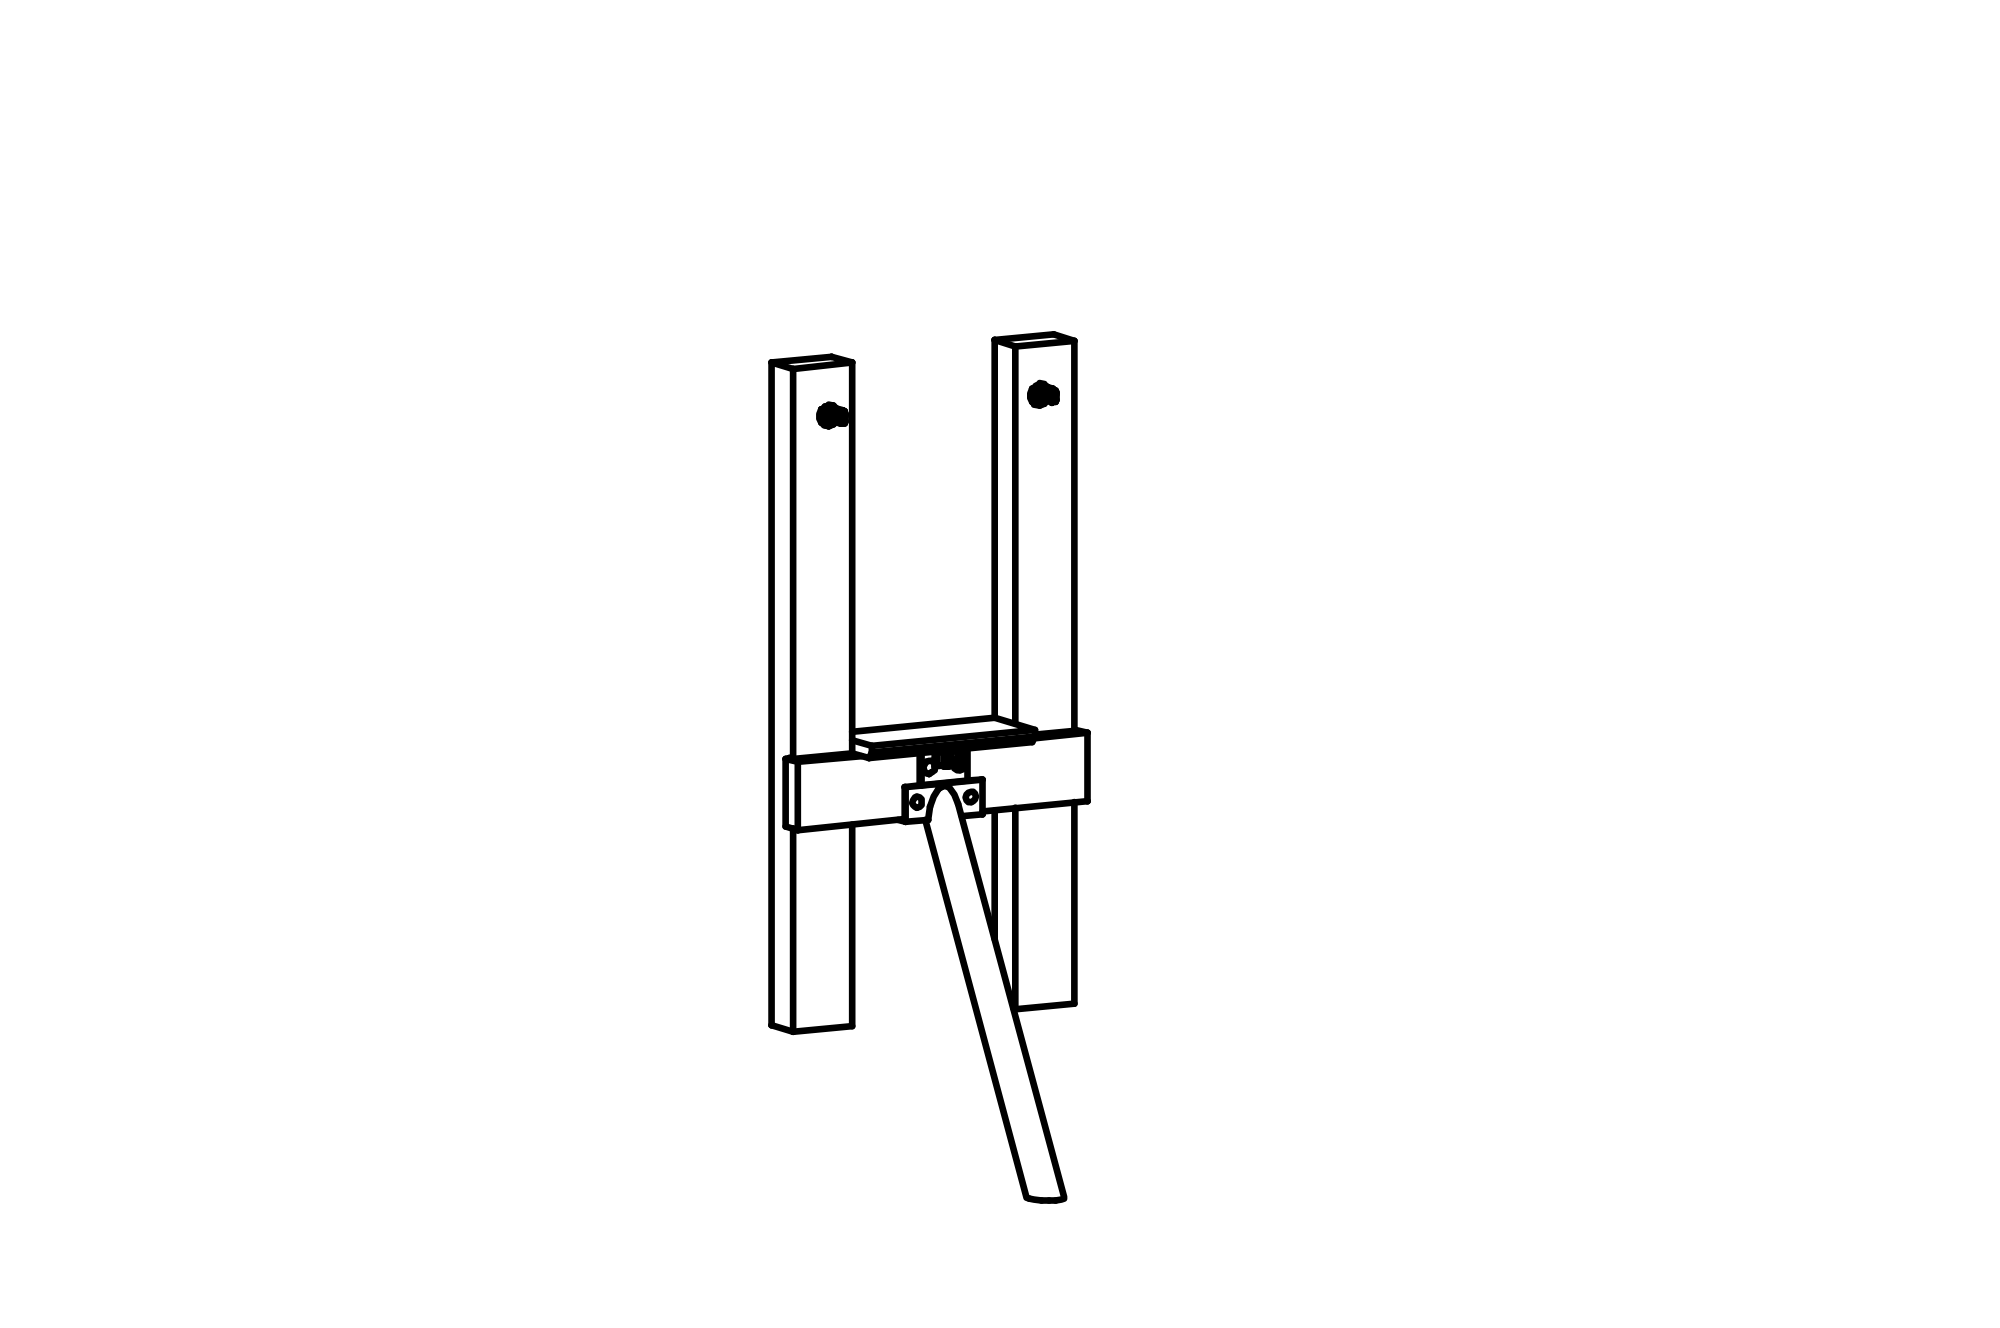 Support Frame, height = 1 m  with core-free sawn-timbers